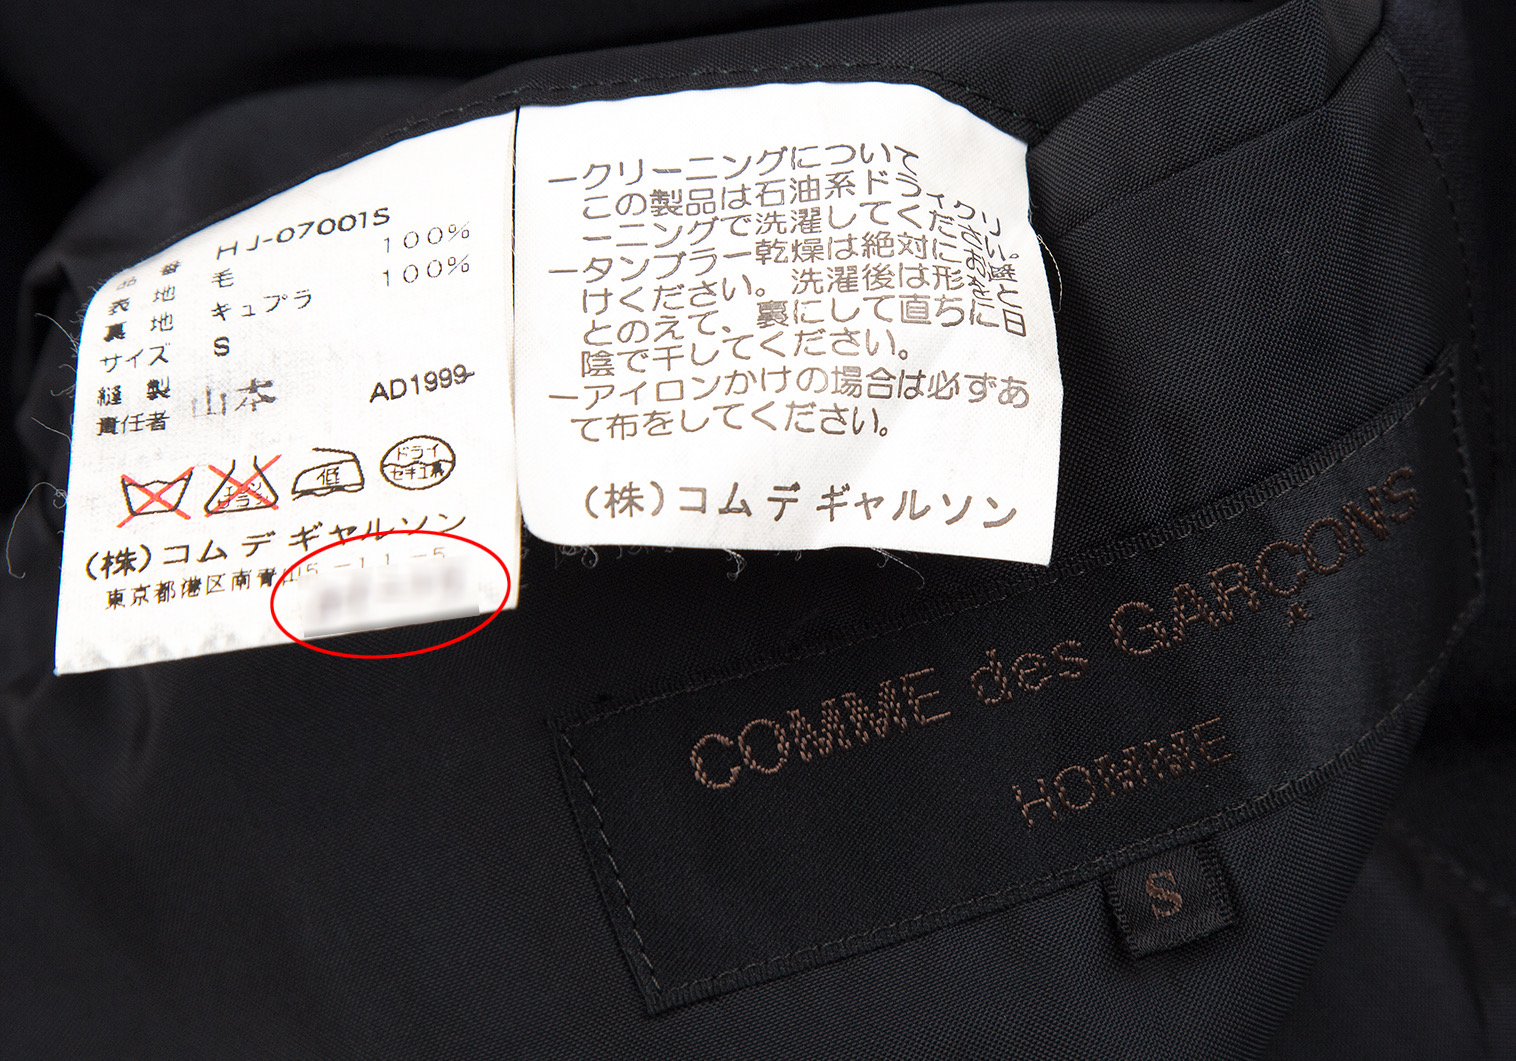 80s COMME des GARCONS HOMME セーター ヘリンボーン